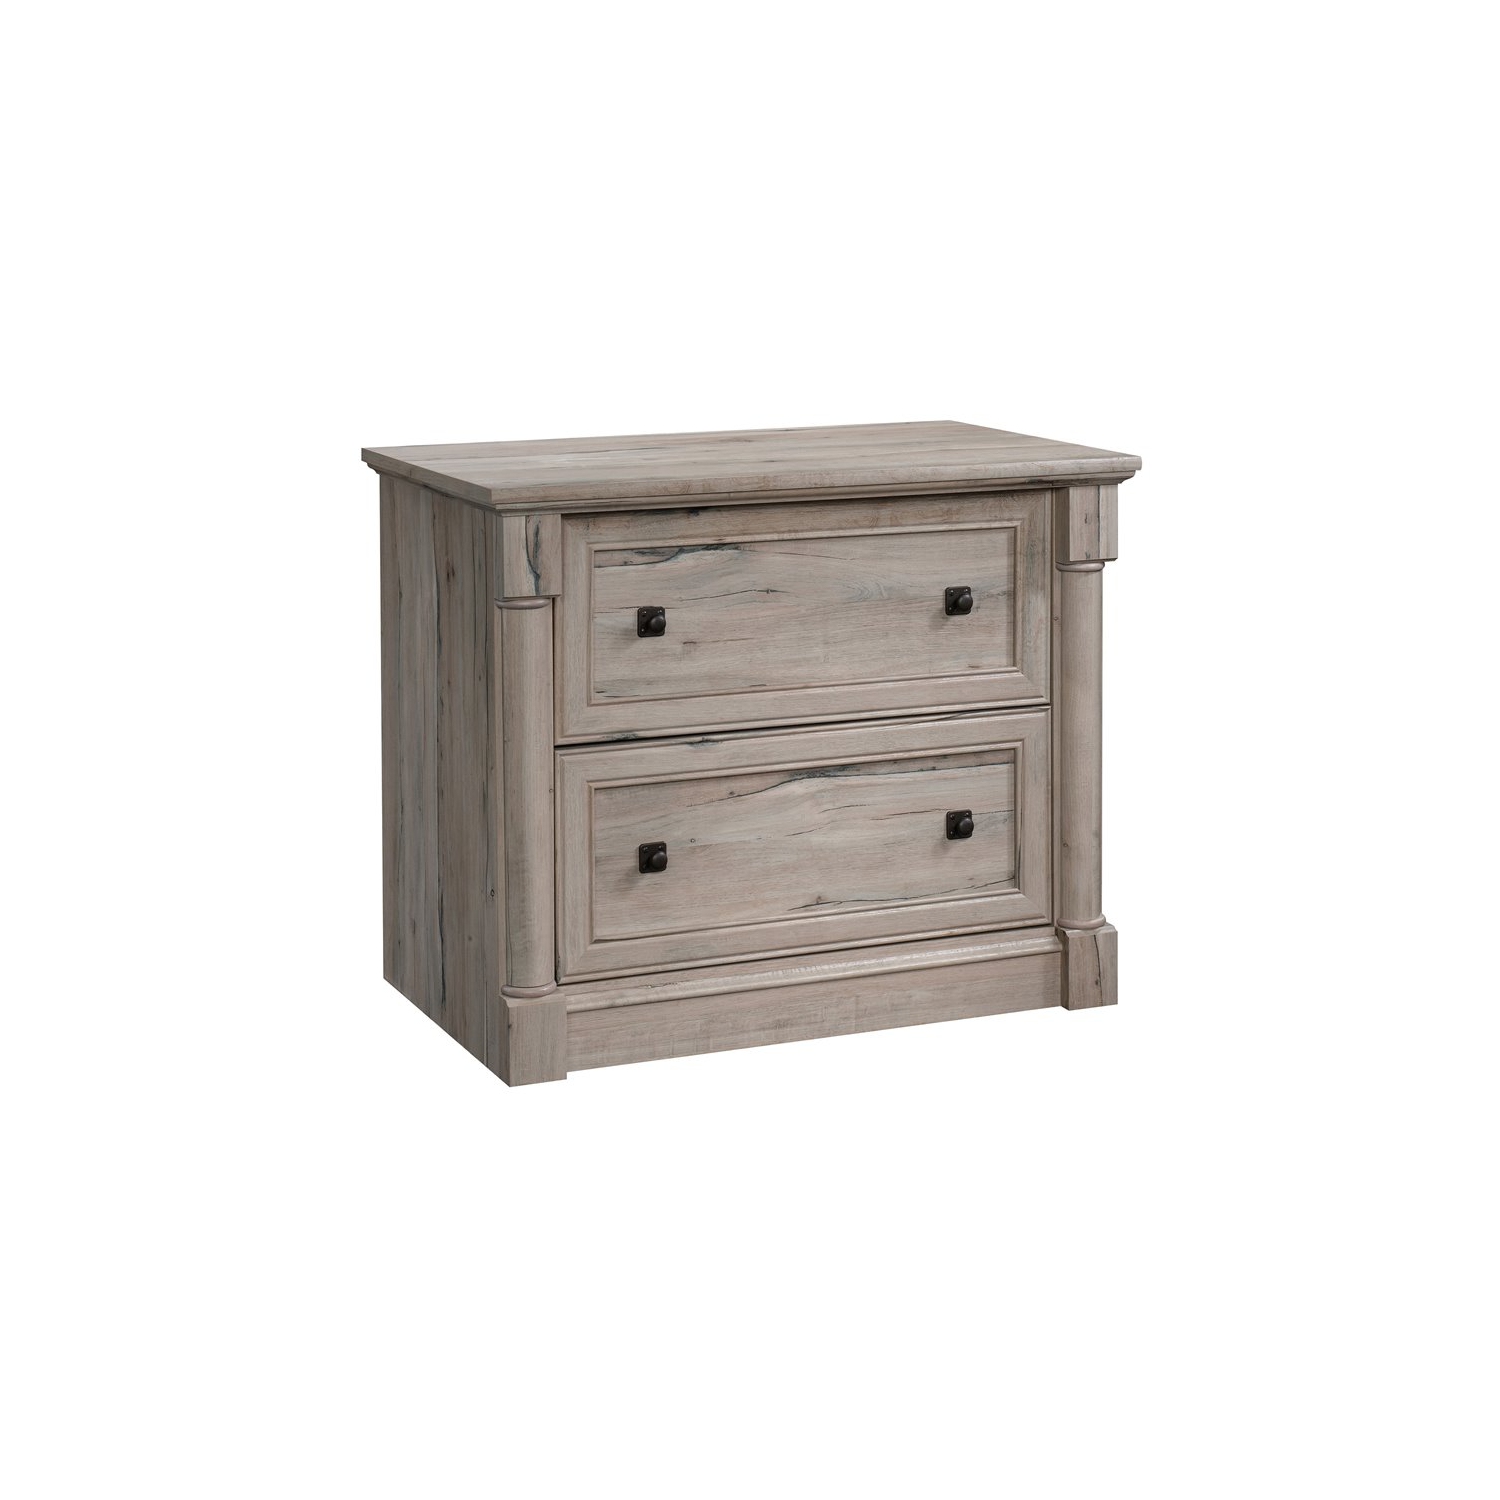 Sauder Palladia Contemporary Wood 2-Drawer Lateral File Cabinet in Split Oak